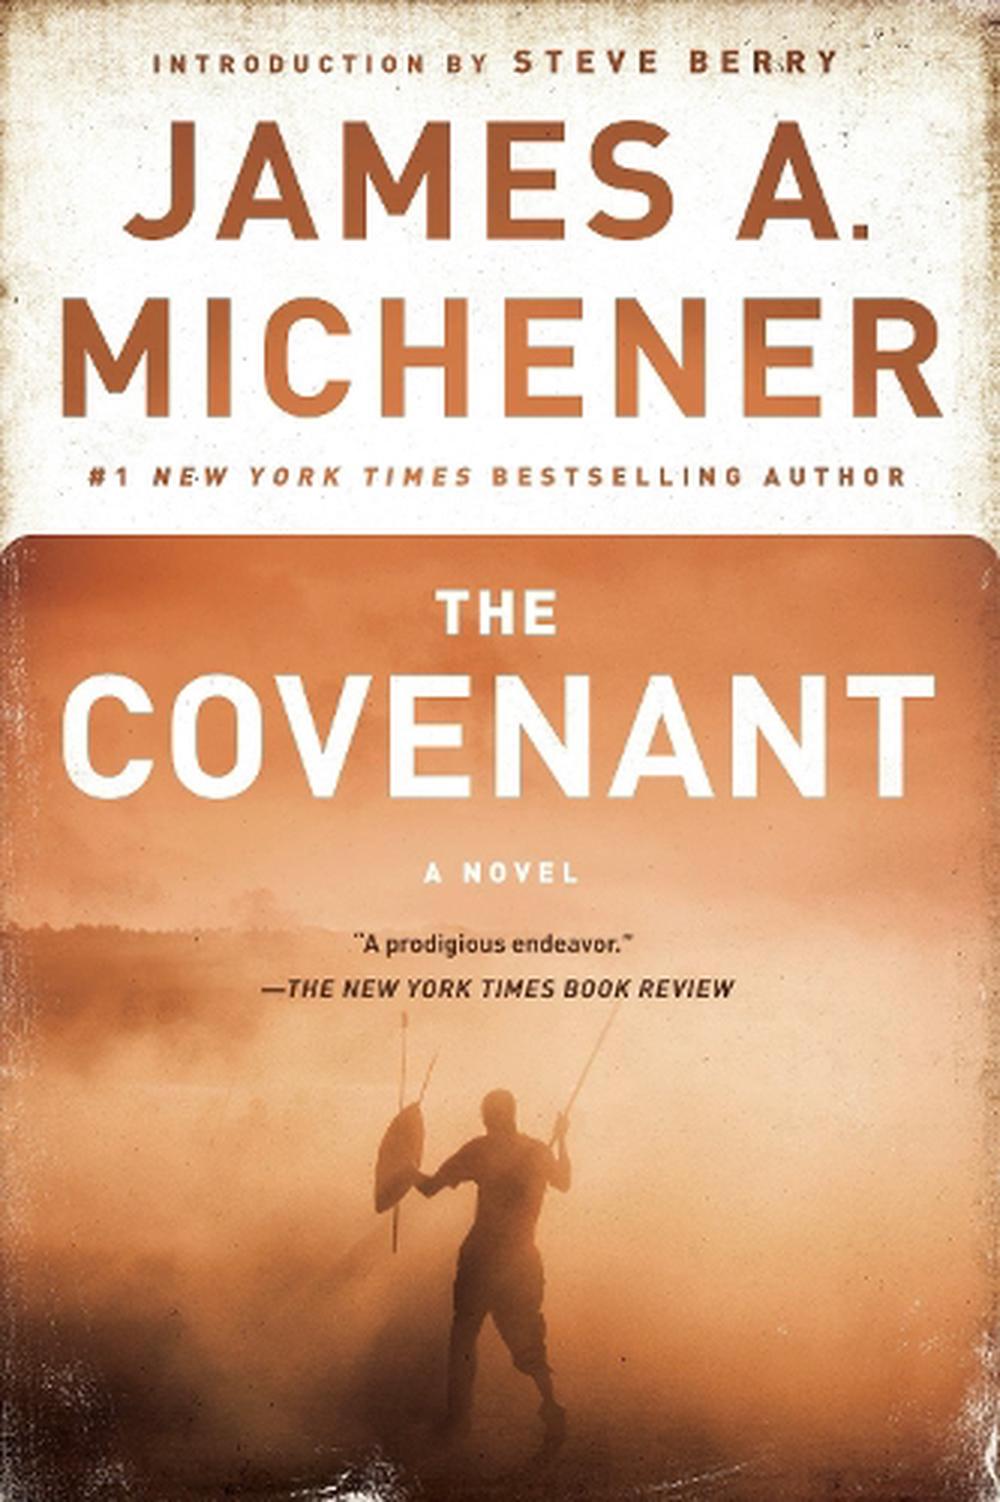 The Covenant A Novel by James A. Michener (English) Paperback Book